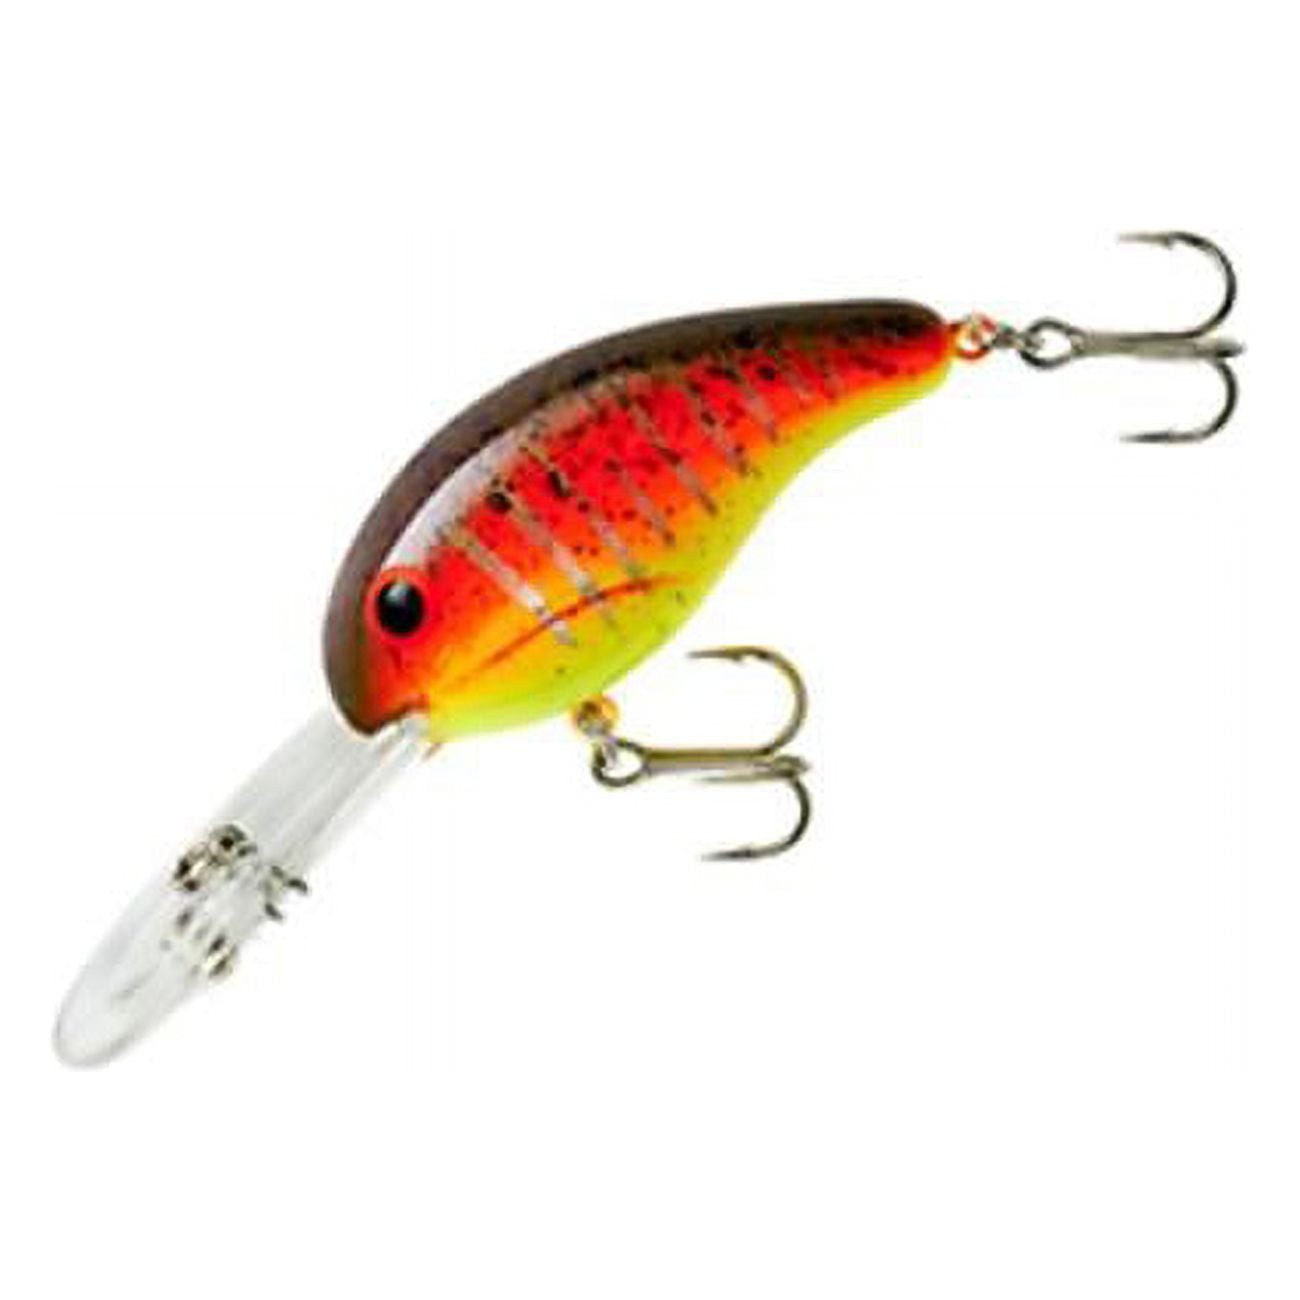 Bandit BDT3D23 2 in. & 0.375 oz DR Wild Thing Fishing Lure 